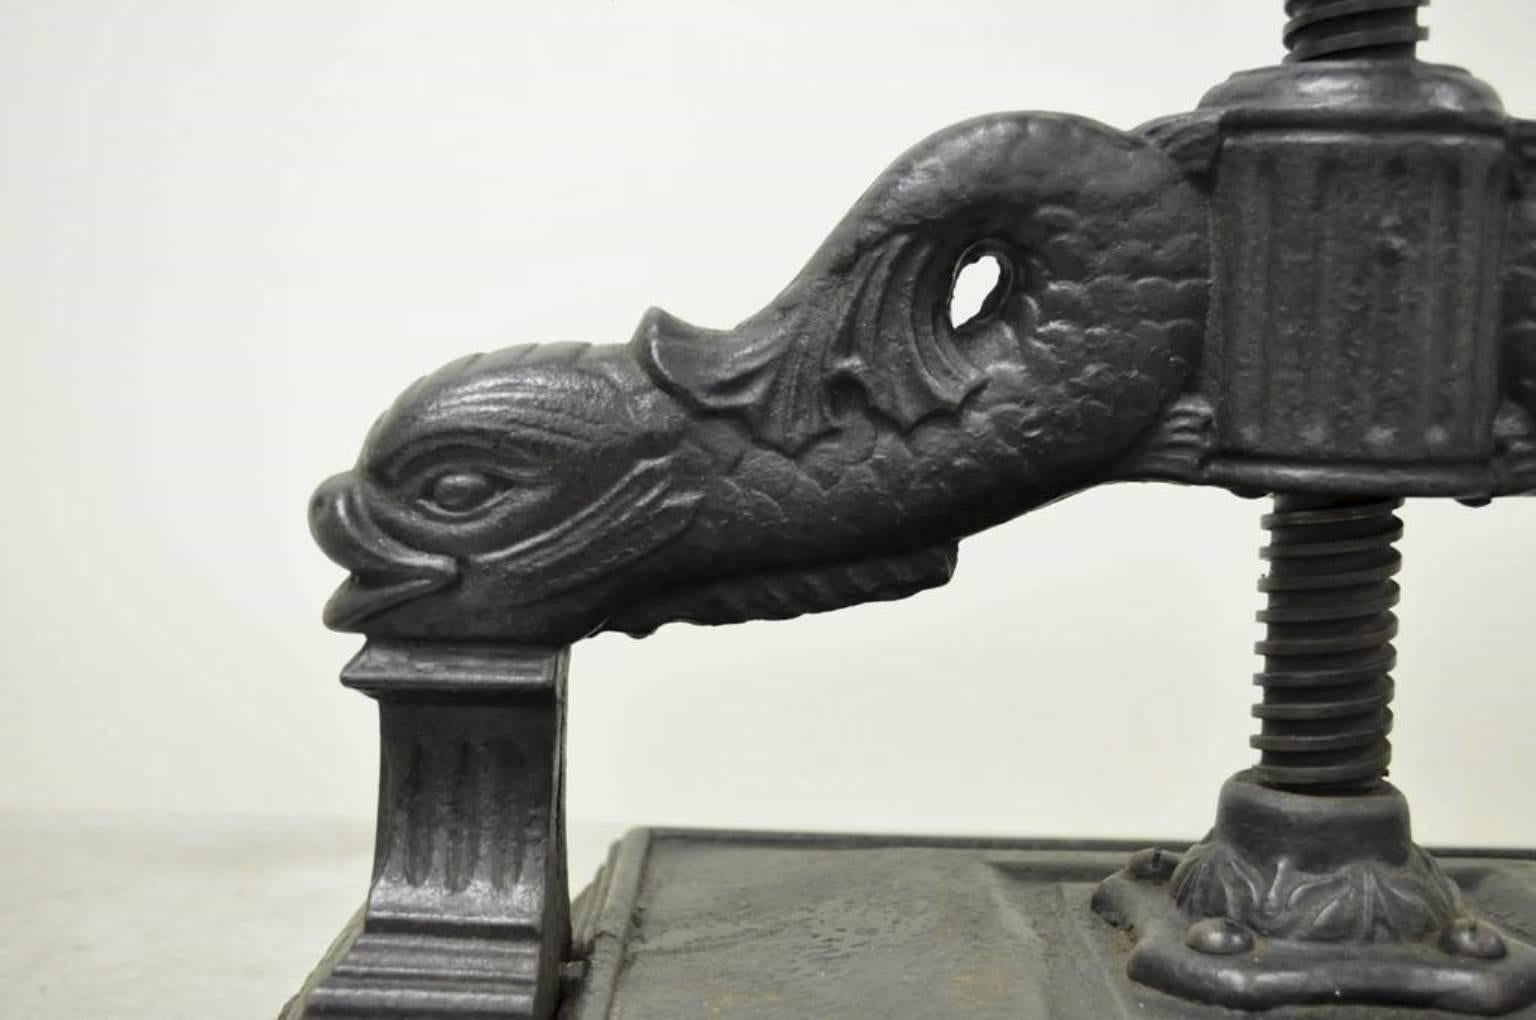 American Ornate Antique 19th C Cast Iron Classical Dolphin Bookbinders Book Binders Press